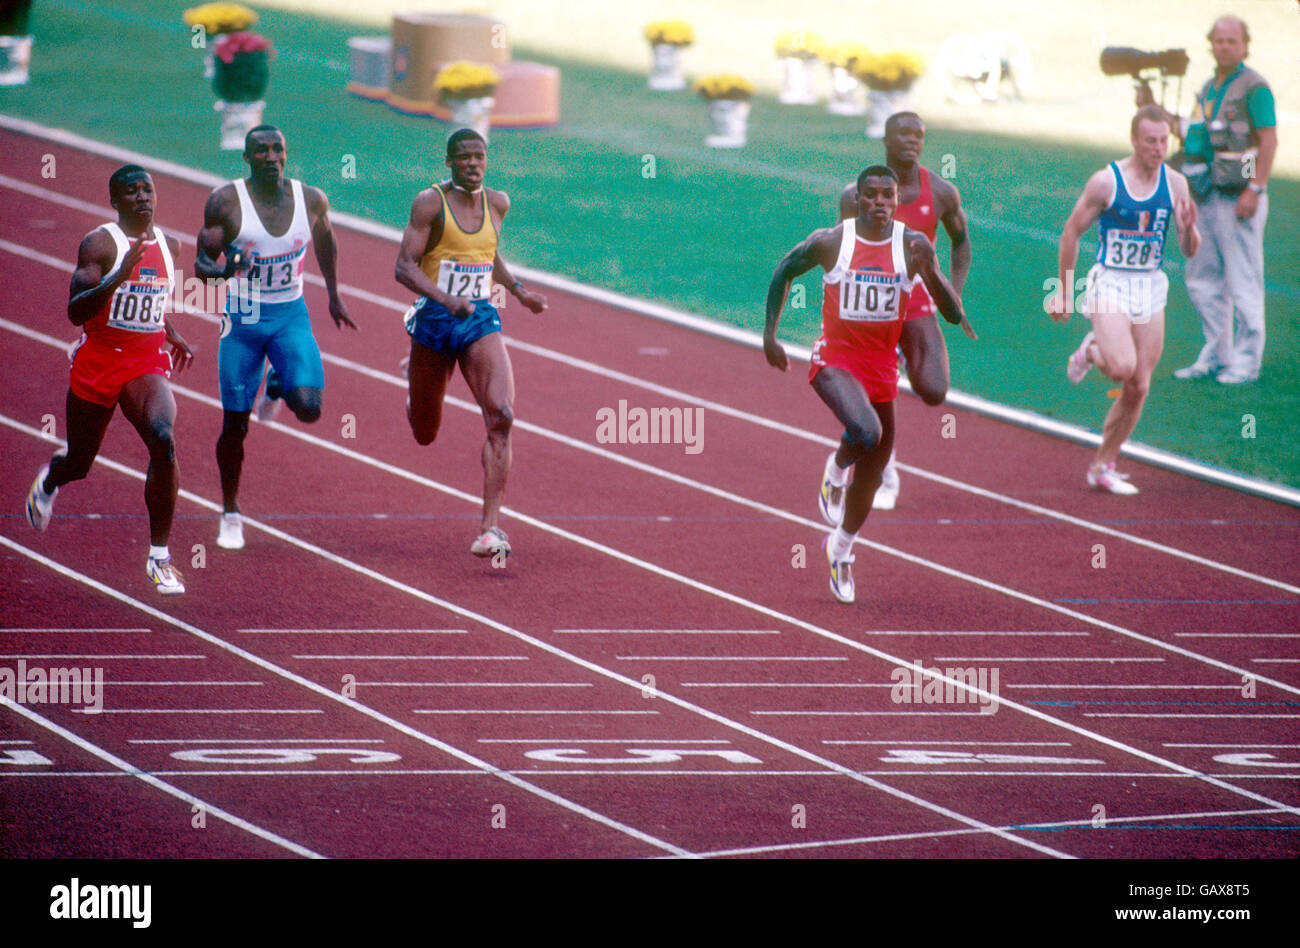 USA's Joe DeLoach (l) comes home to win gold ahead of USA's Carl Lewis (third r, silver), Brazil's Robson da Silva (third l, bronze), Great Britain's Linford Christie (second l), Canada's Atlee Mahorn (second r) and France's Gilles Queneherve (r) Stock Photo